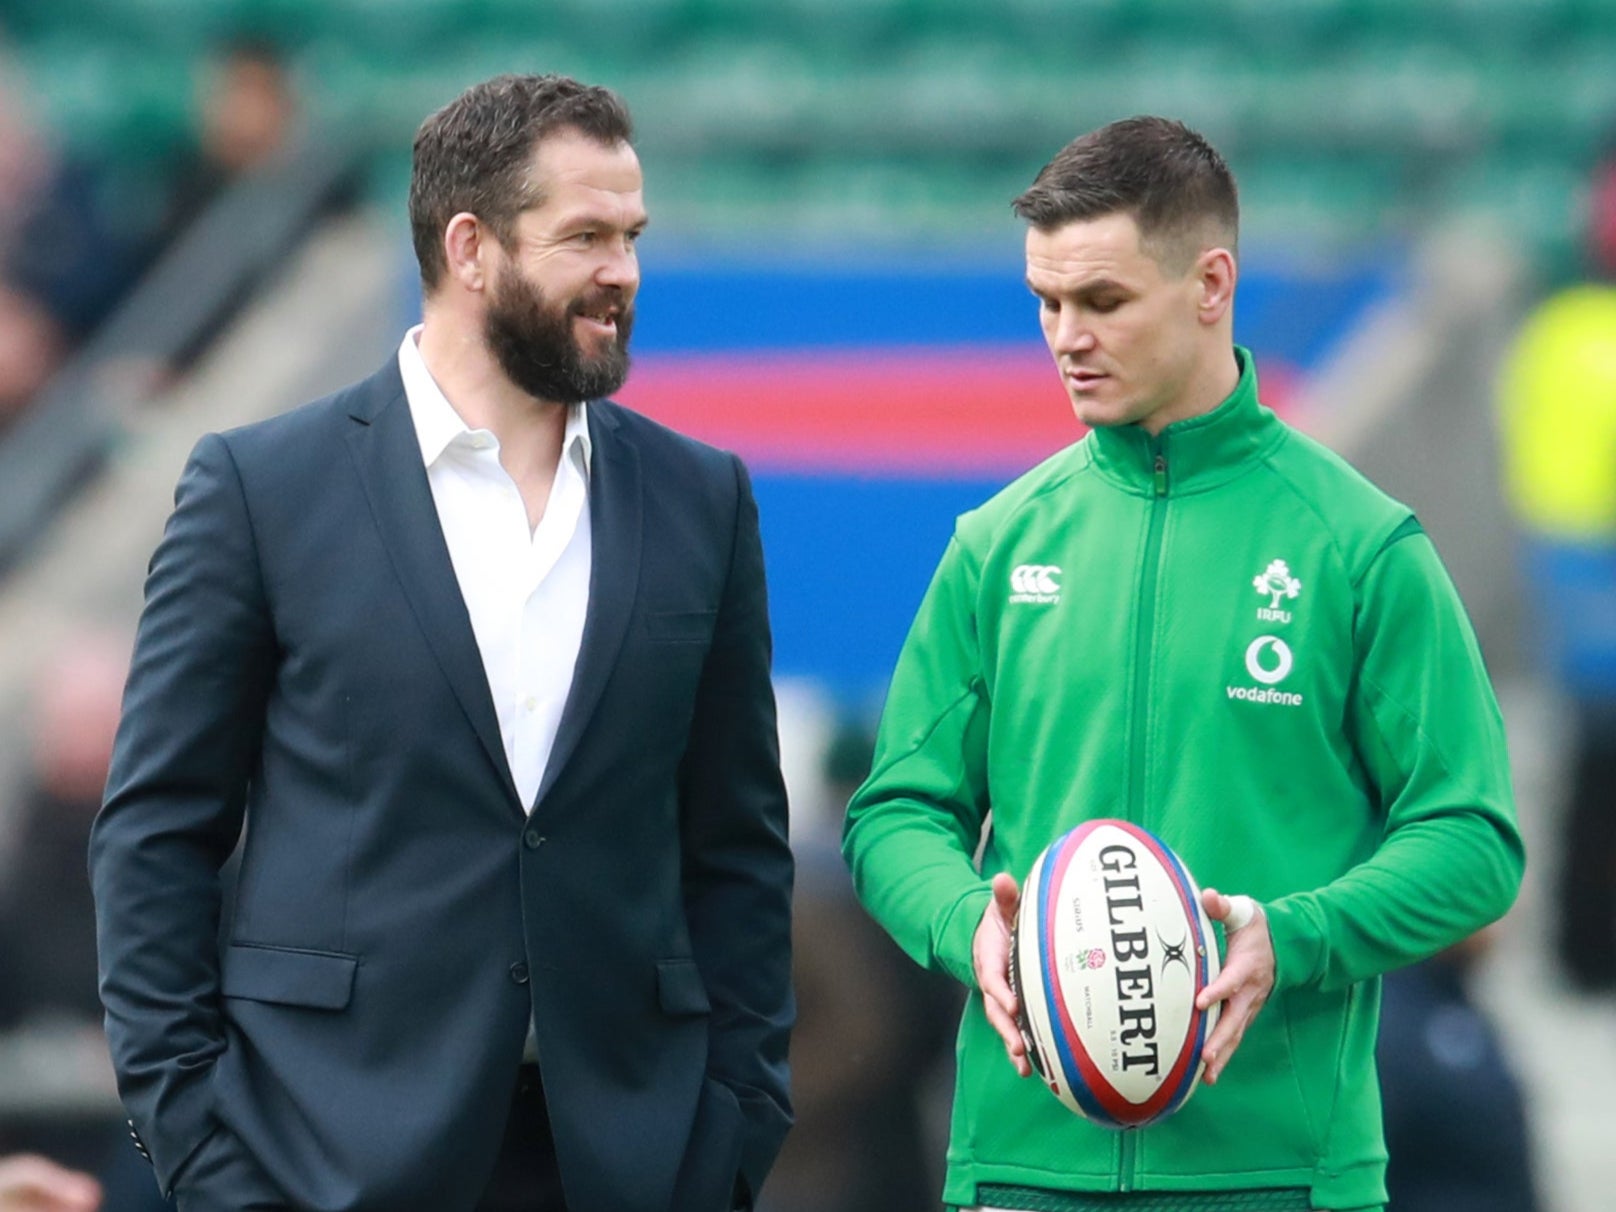 Andy Farrell, left, has named a 37-player squad for the 2022 Six Nations captained by Johnny Sexton